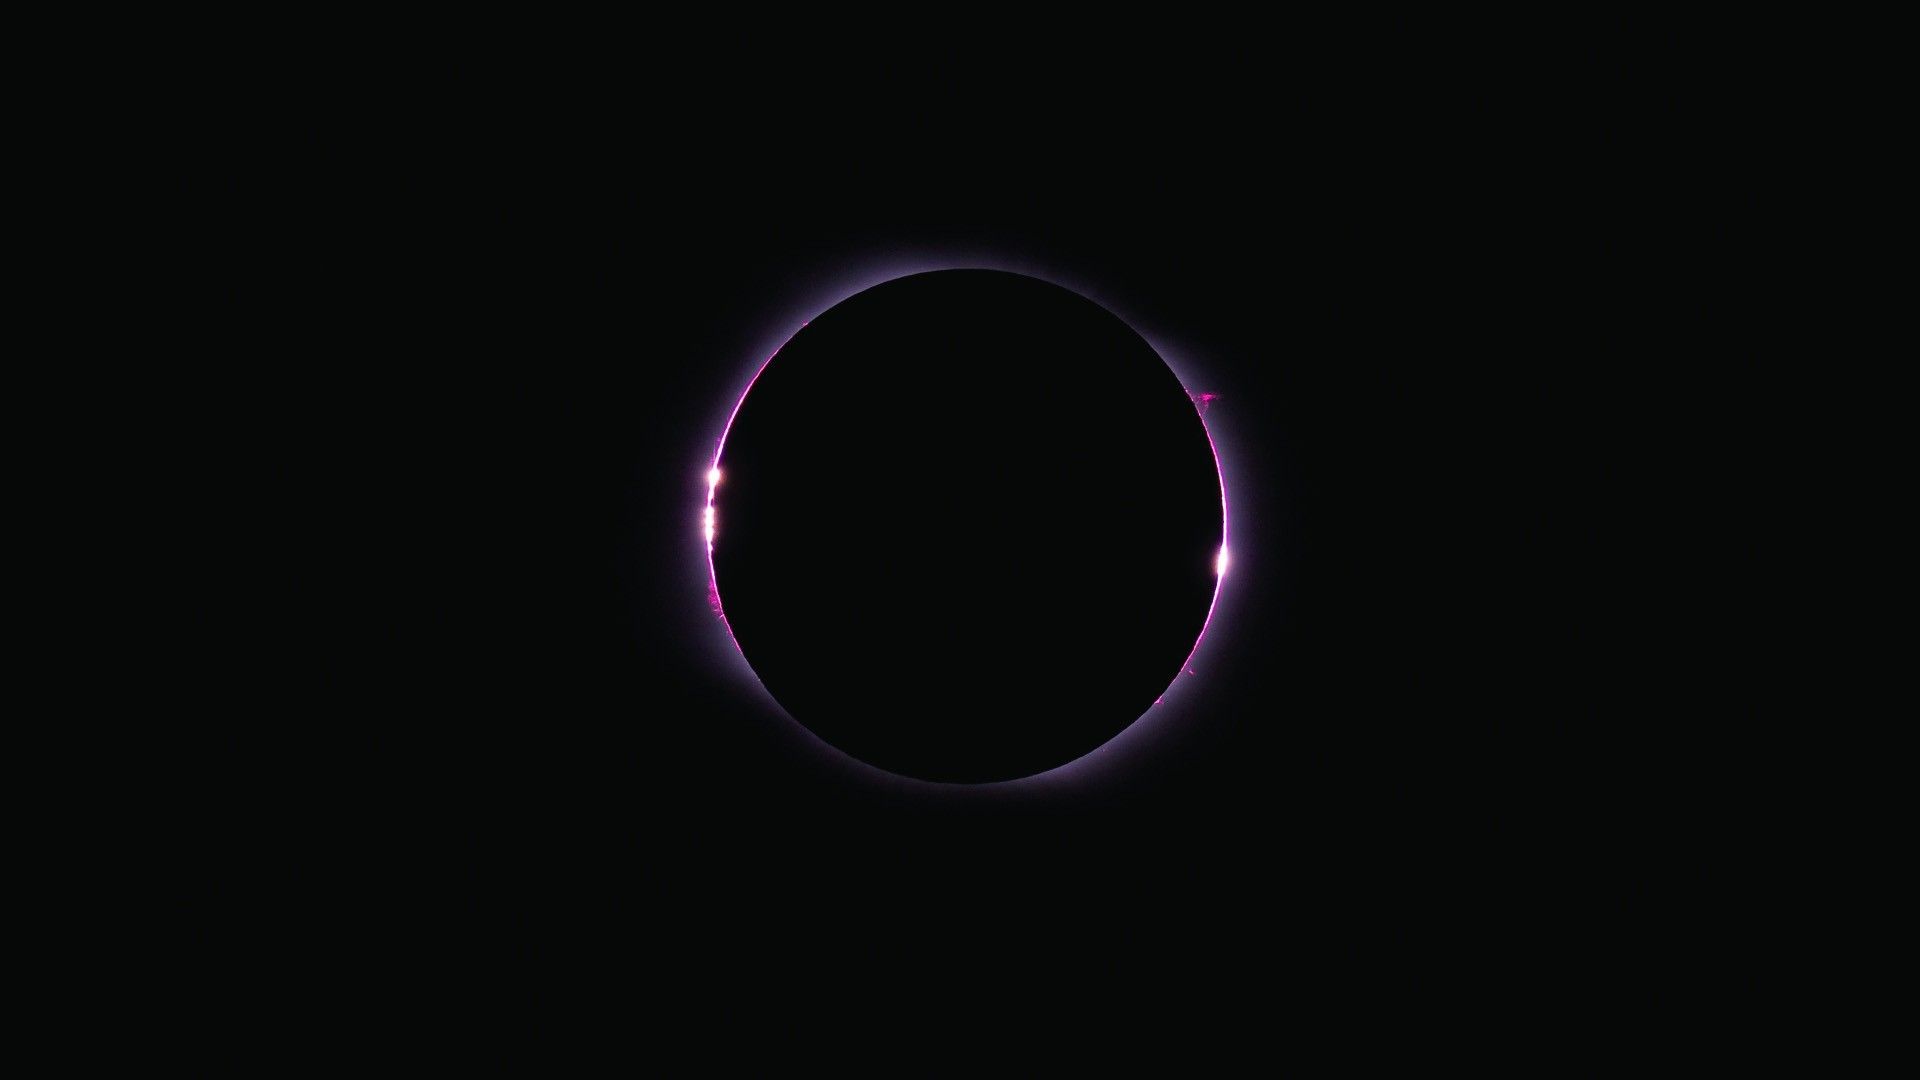 Diamond ring during an eclipse in space wallpaper and image, picture, photo